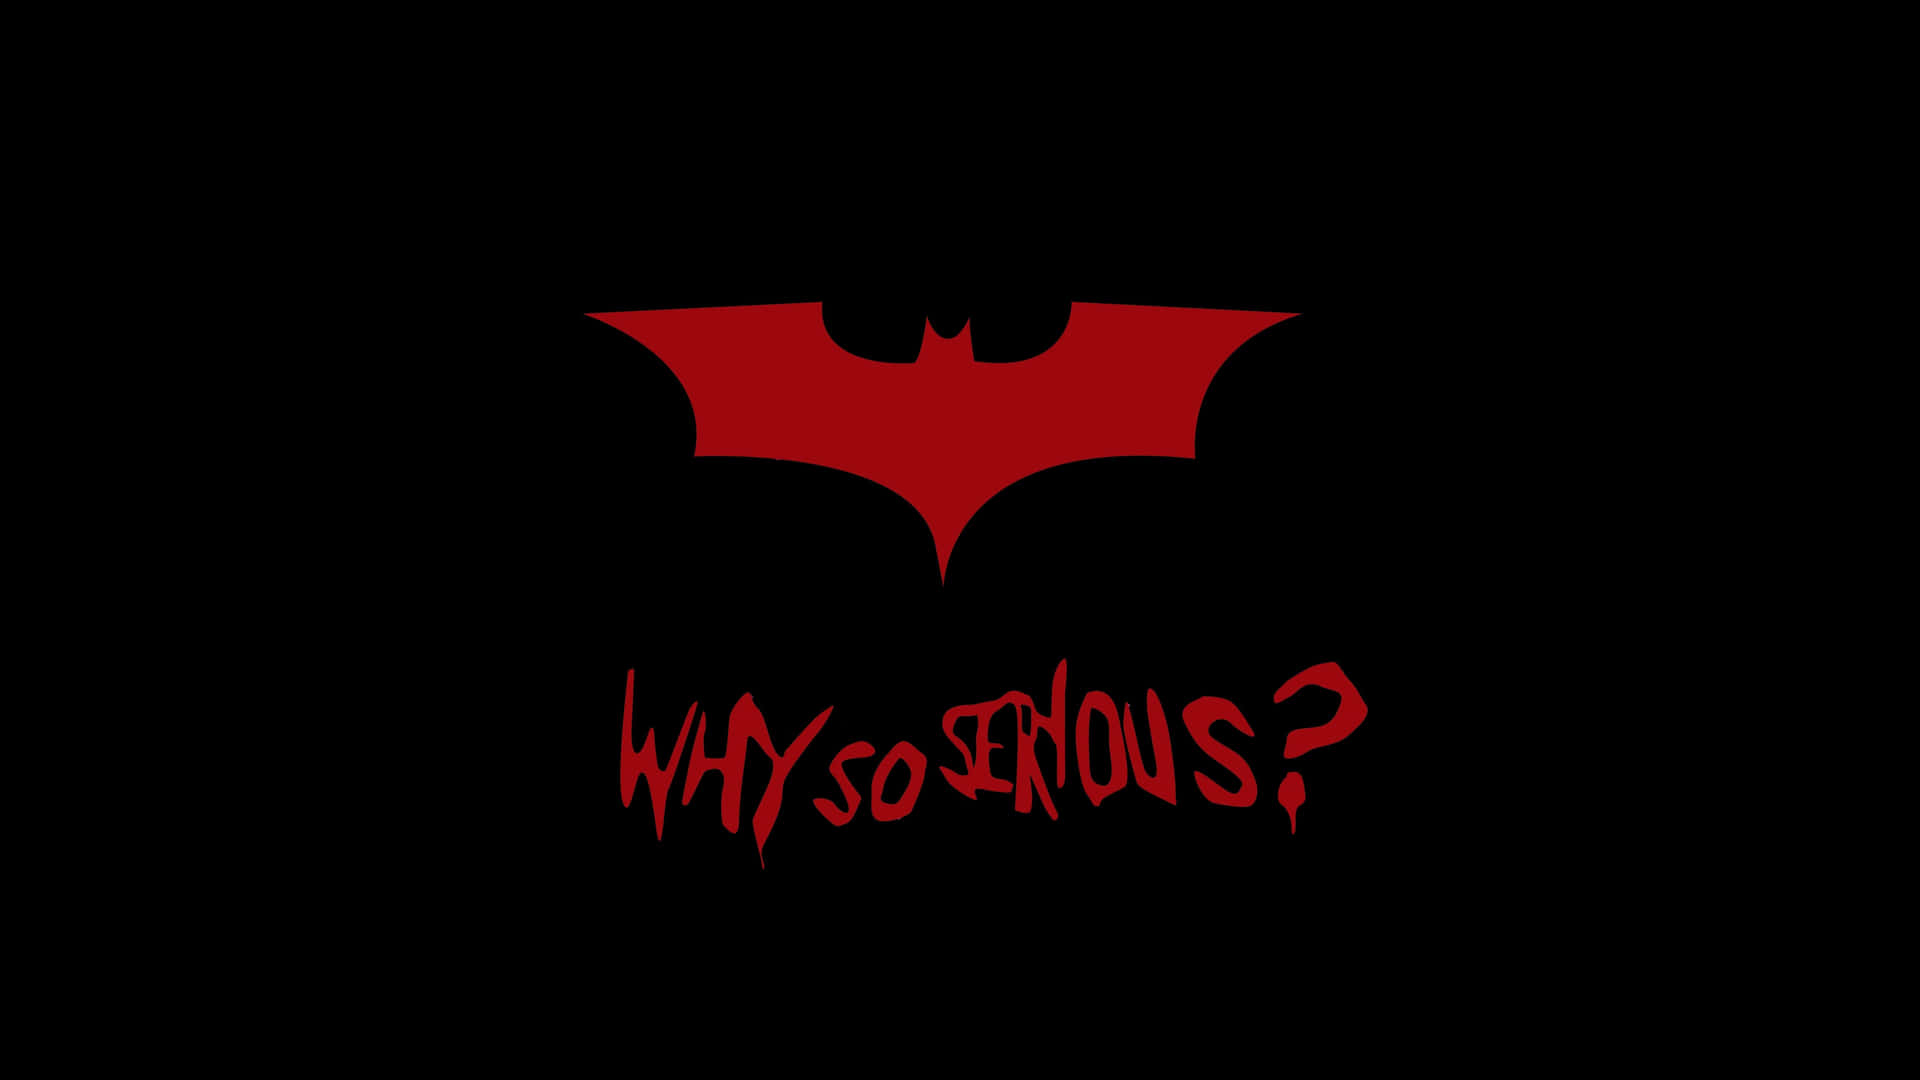 Batman Logo And Why So Serious Quote Wallpaper